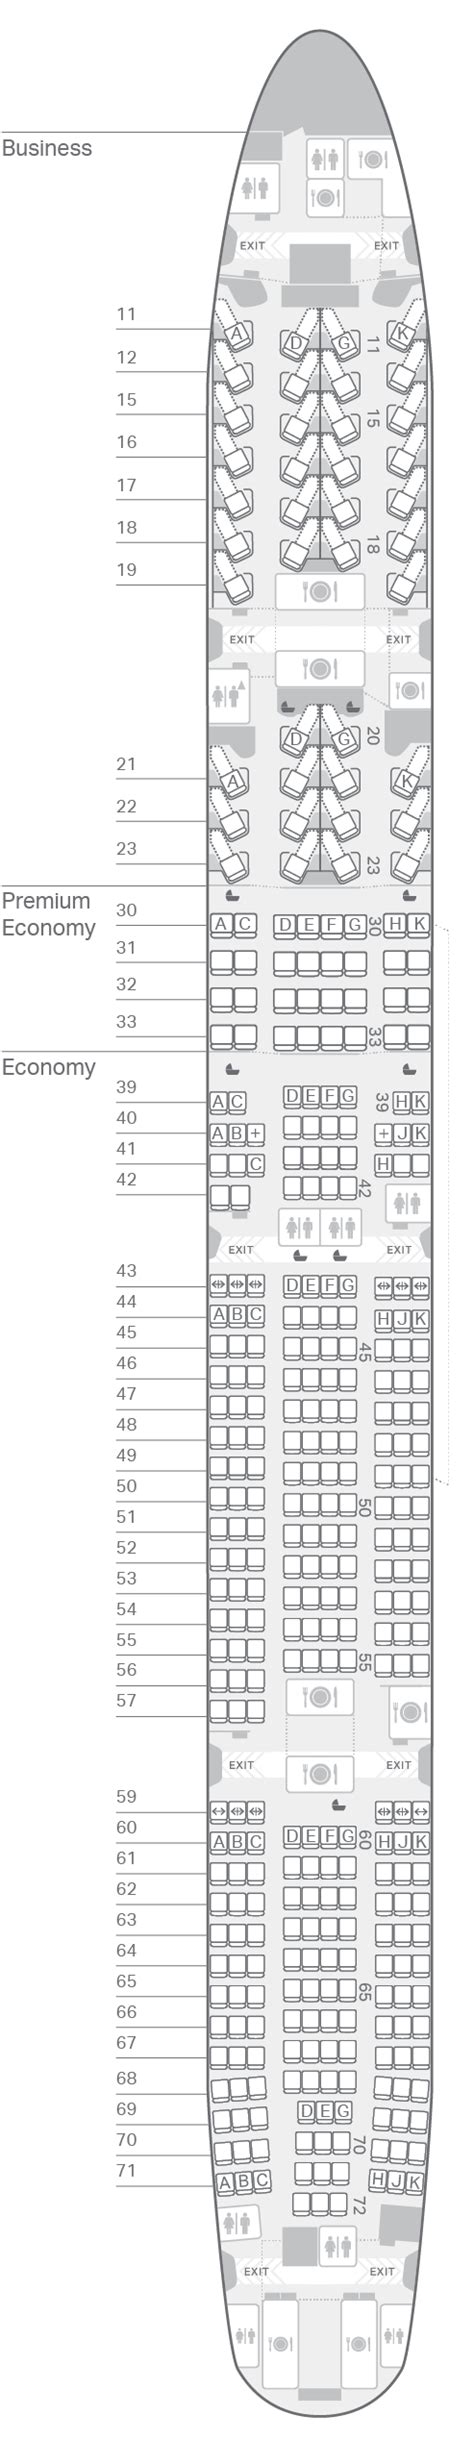 Boeing Emirates Seating Chart Two Birds Home